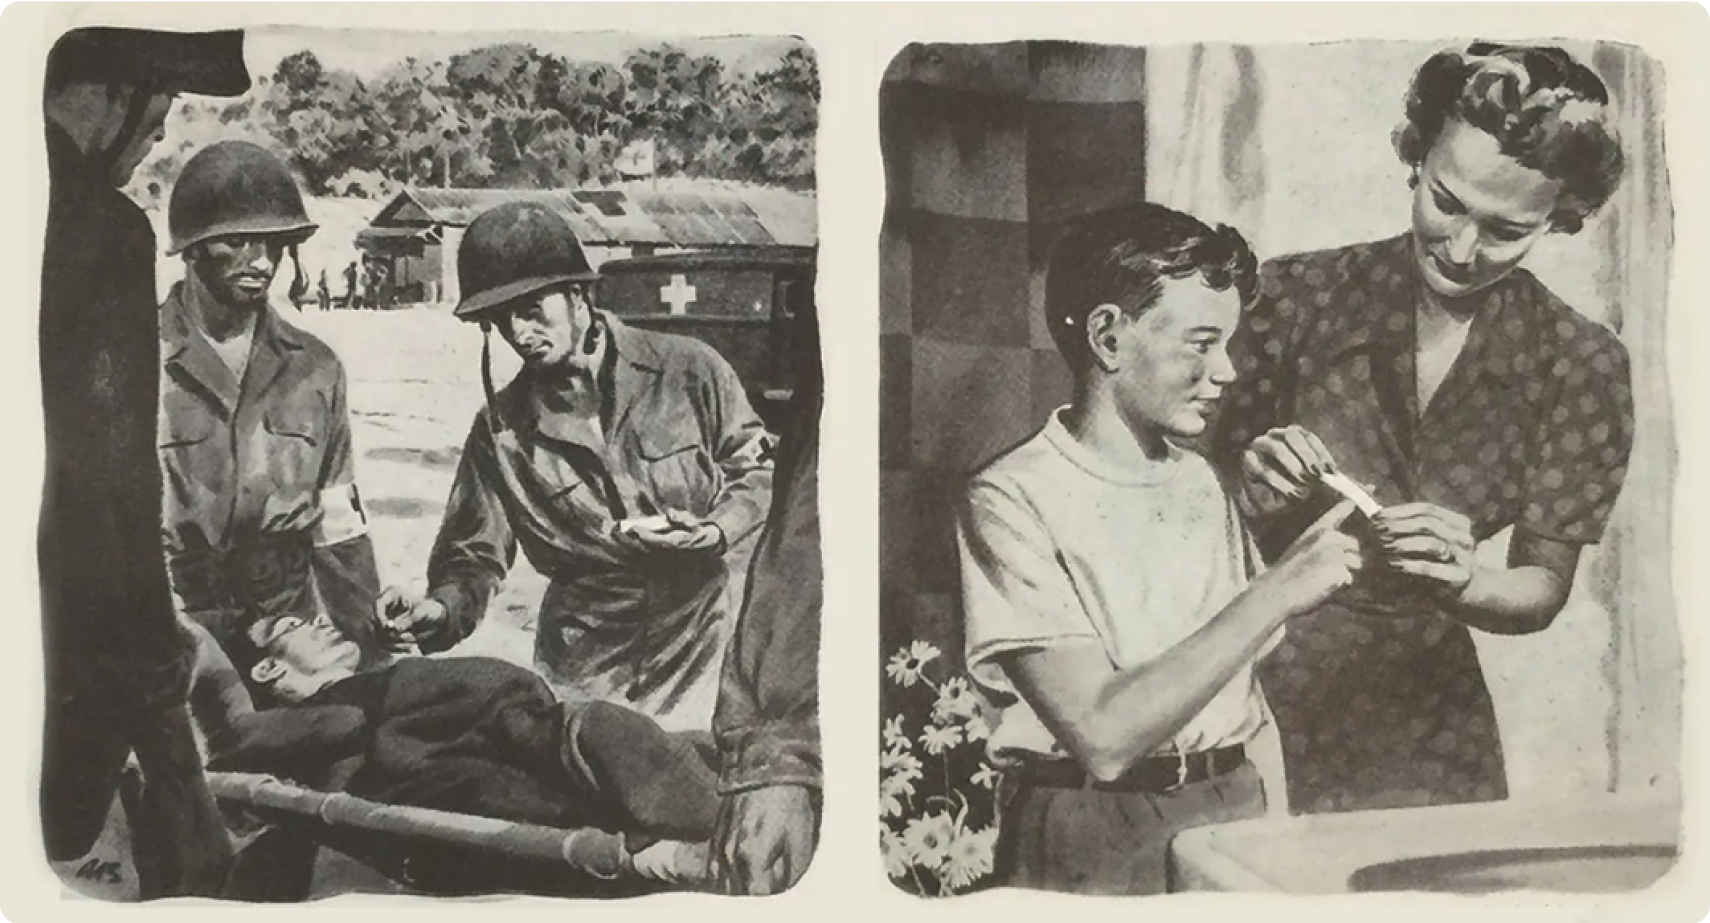 BAND-AID® Brand products in first aid kit for soldiers in WWII